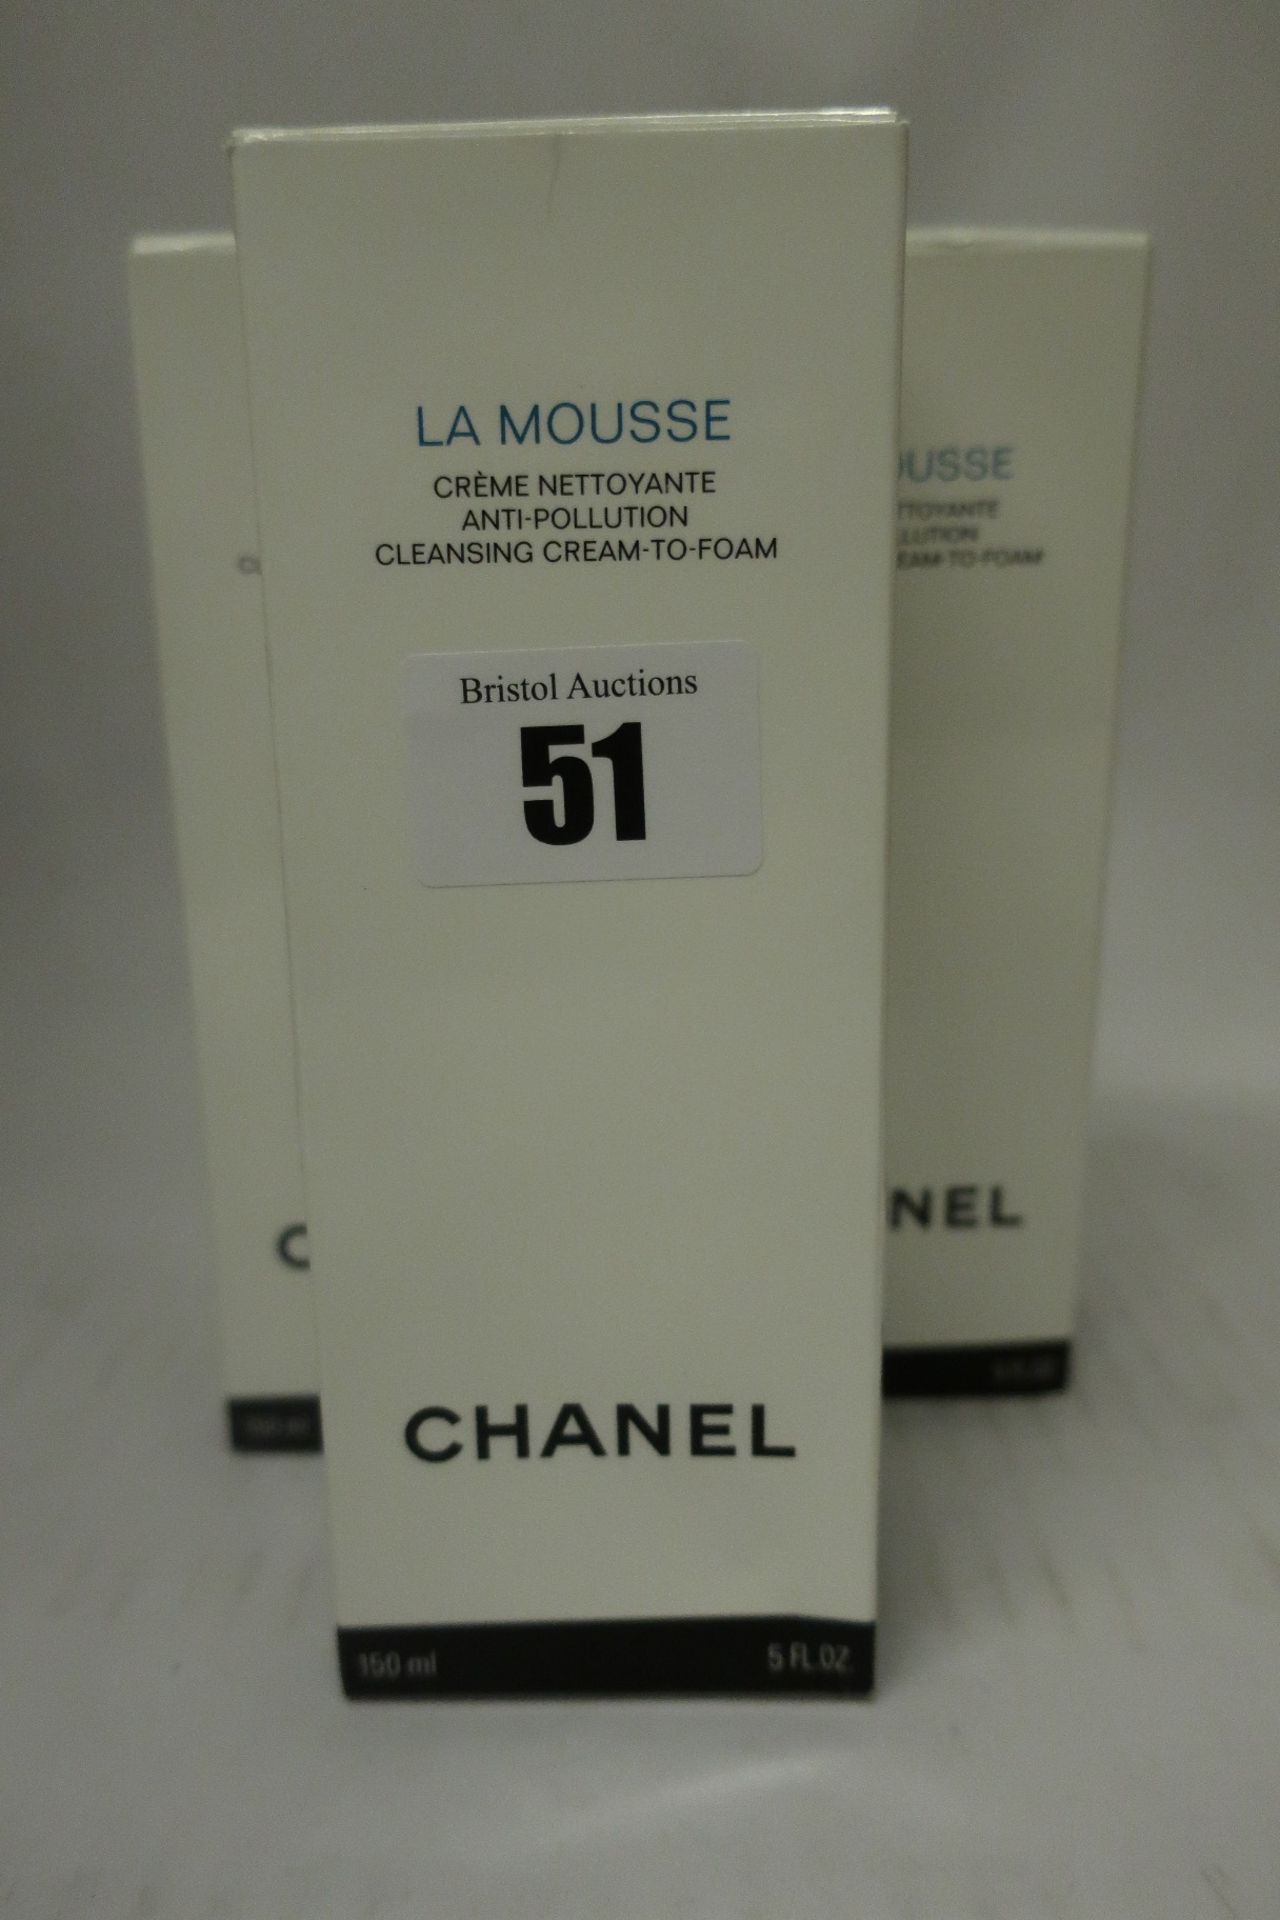 Three Chanel La Mousse anti-pollution cleansing cream to foam.